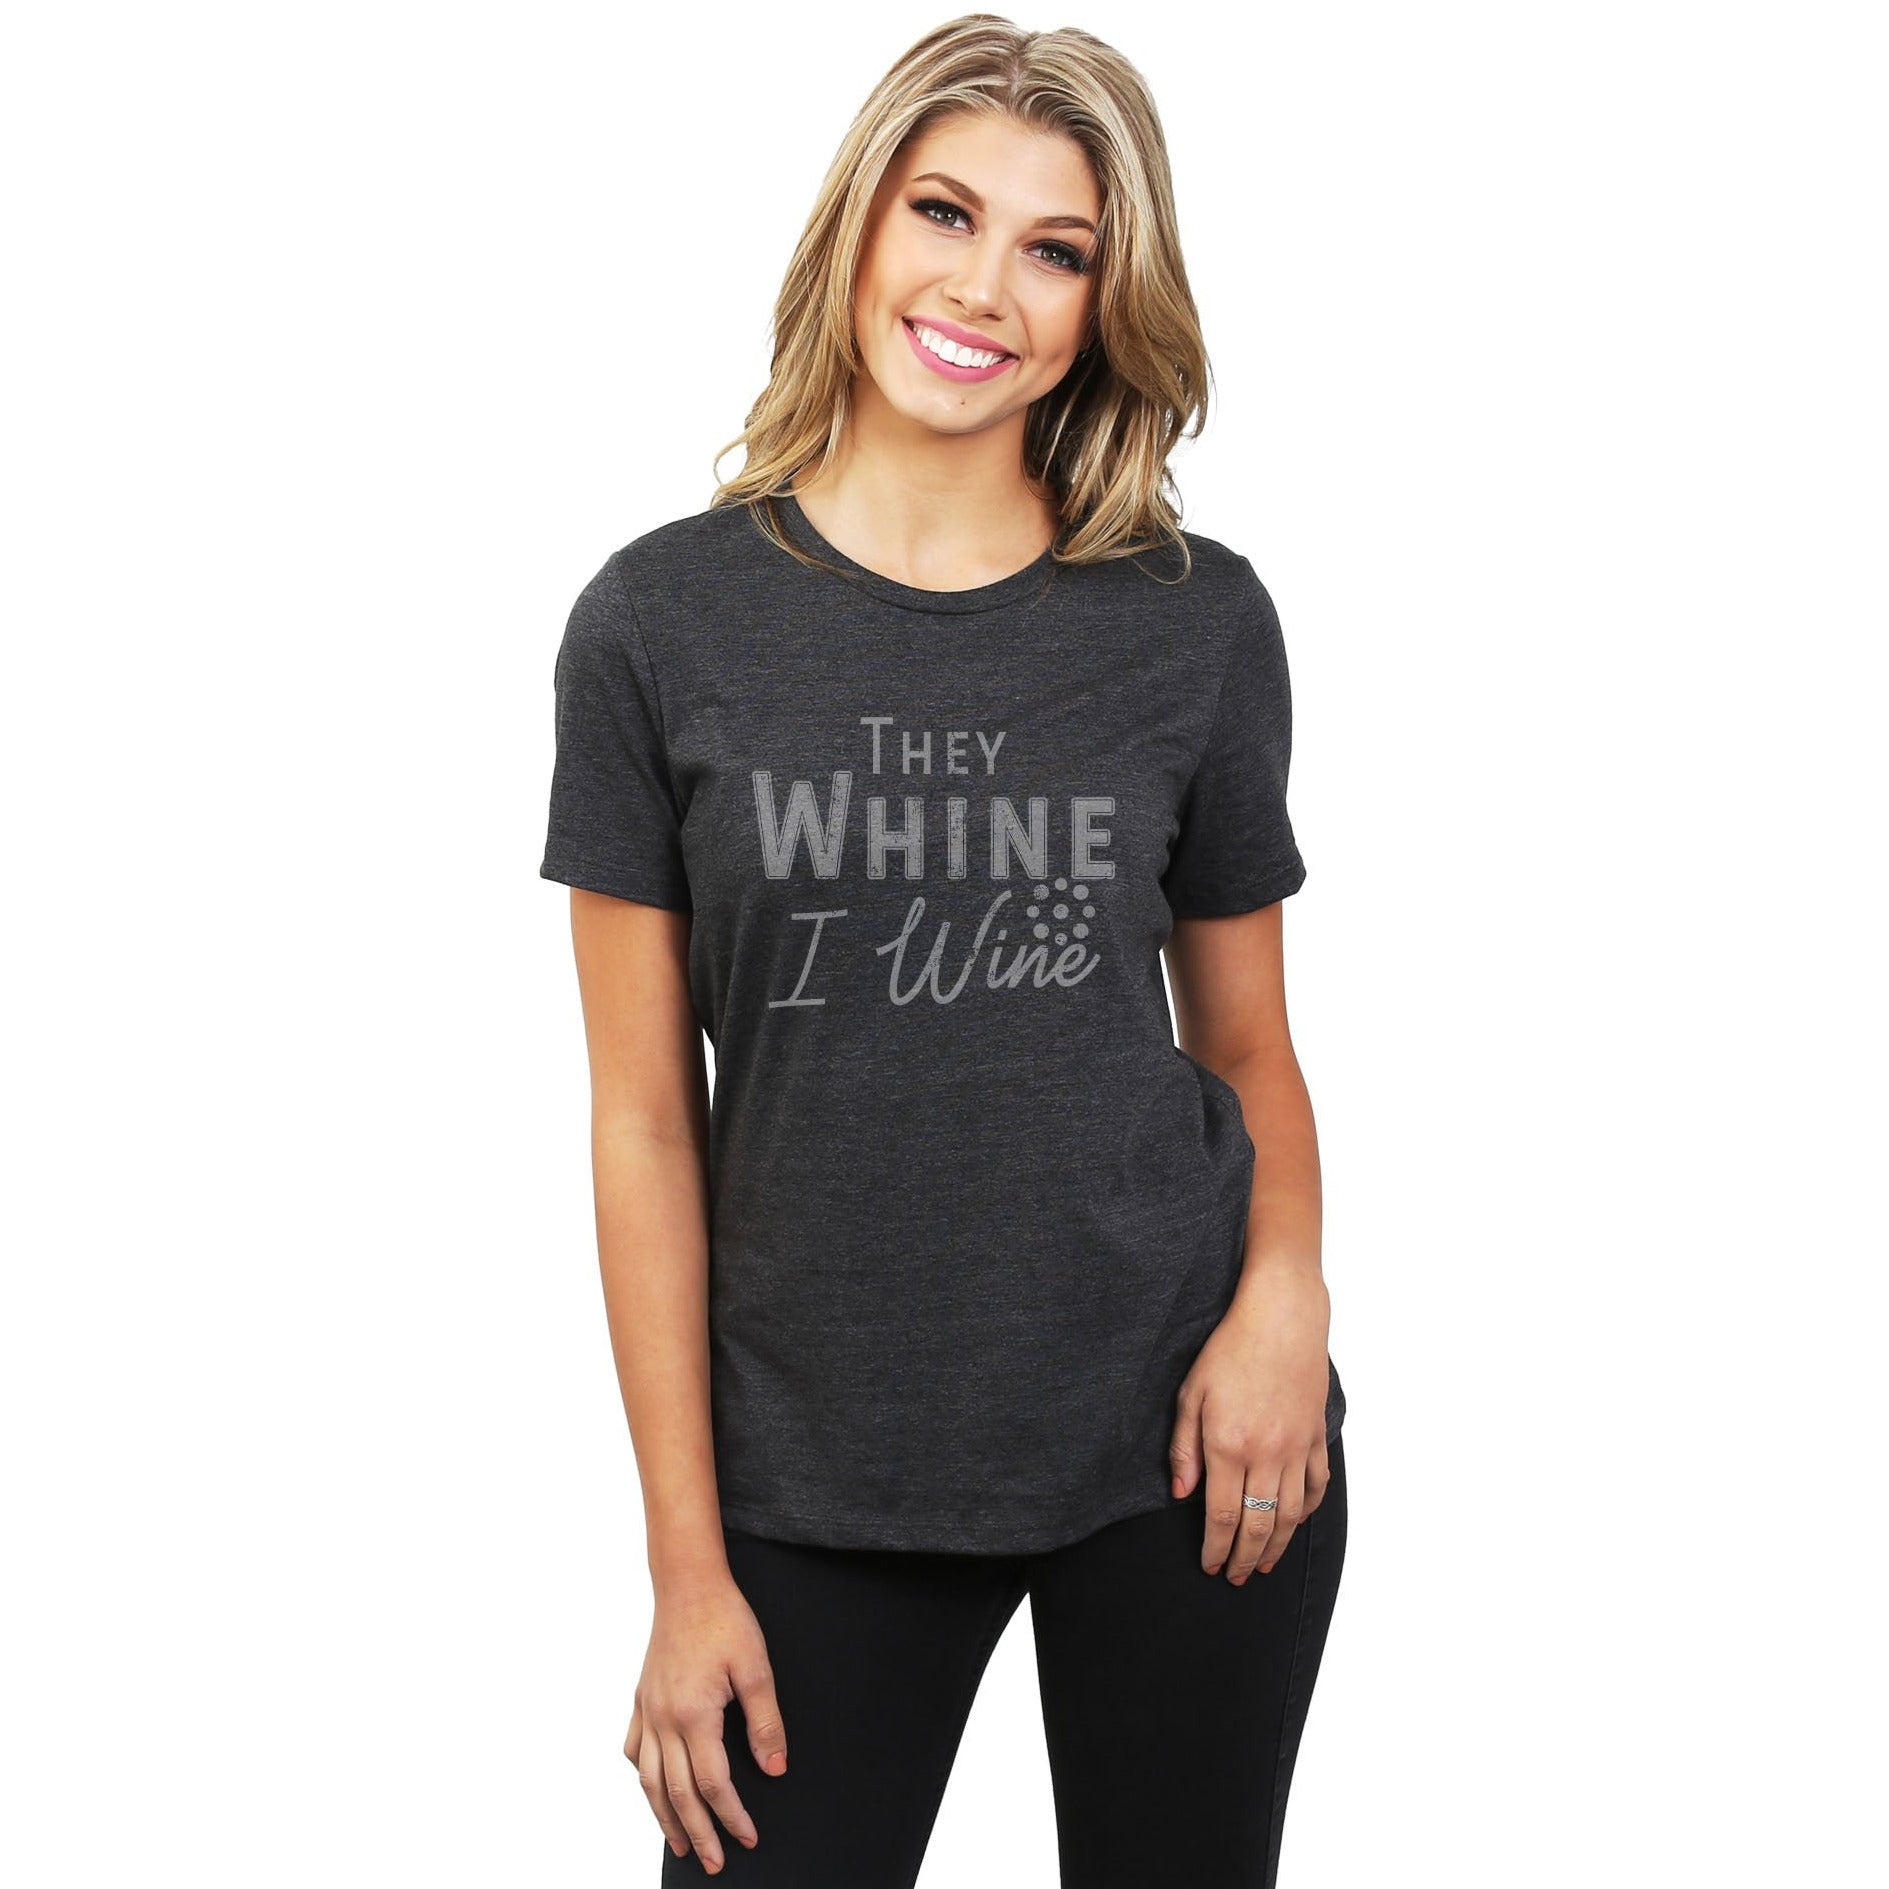 They Whine I Wine Women's Relaxed Crewneck Graphic T-Shirt Top Tee